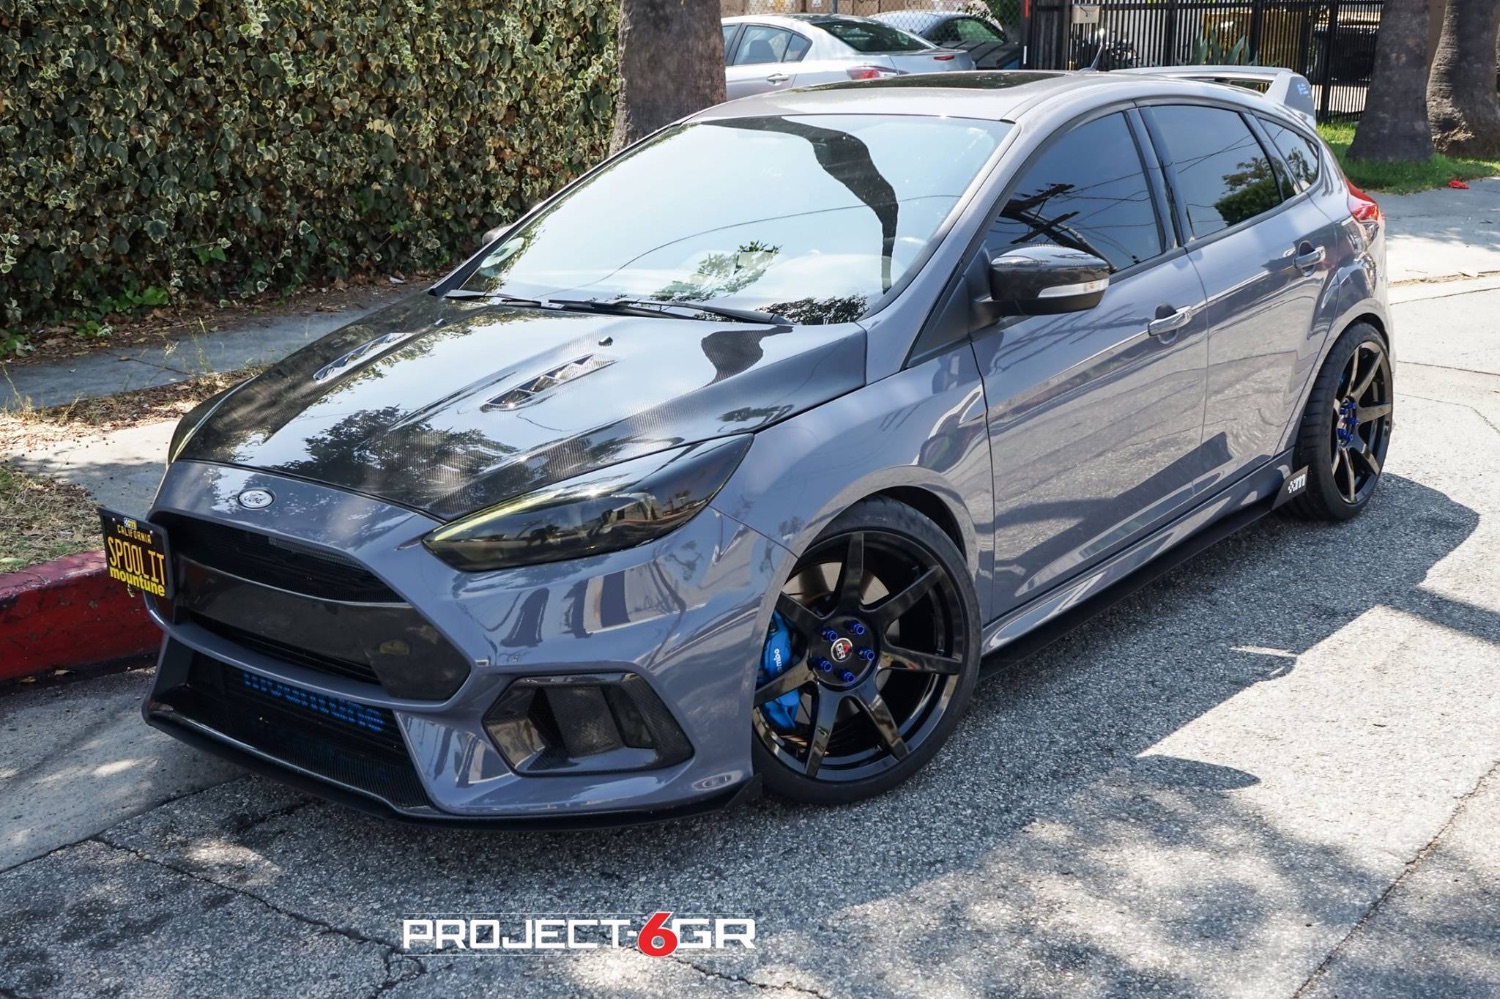 project-6gr-19x9.5-gloss-black-ford-focus-rs-04